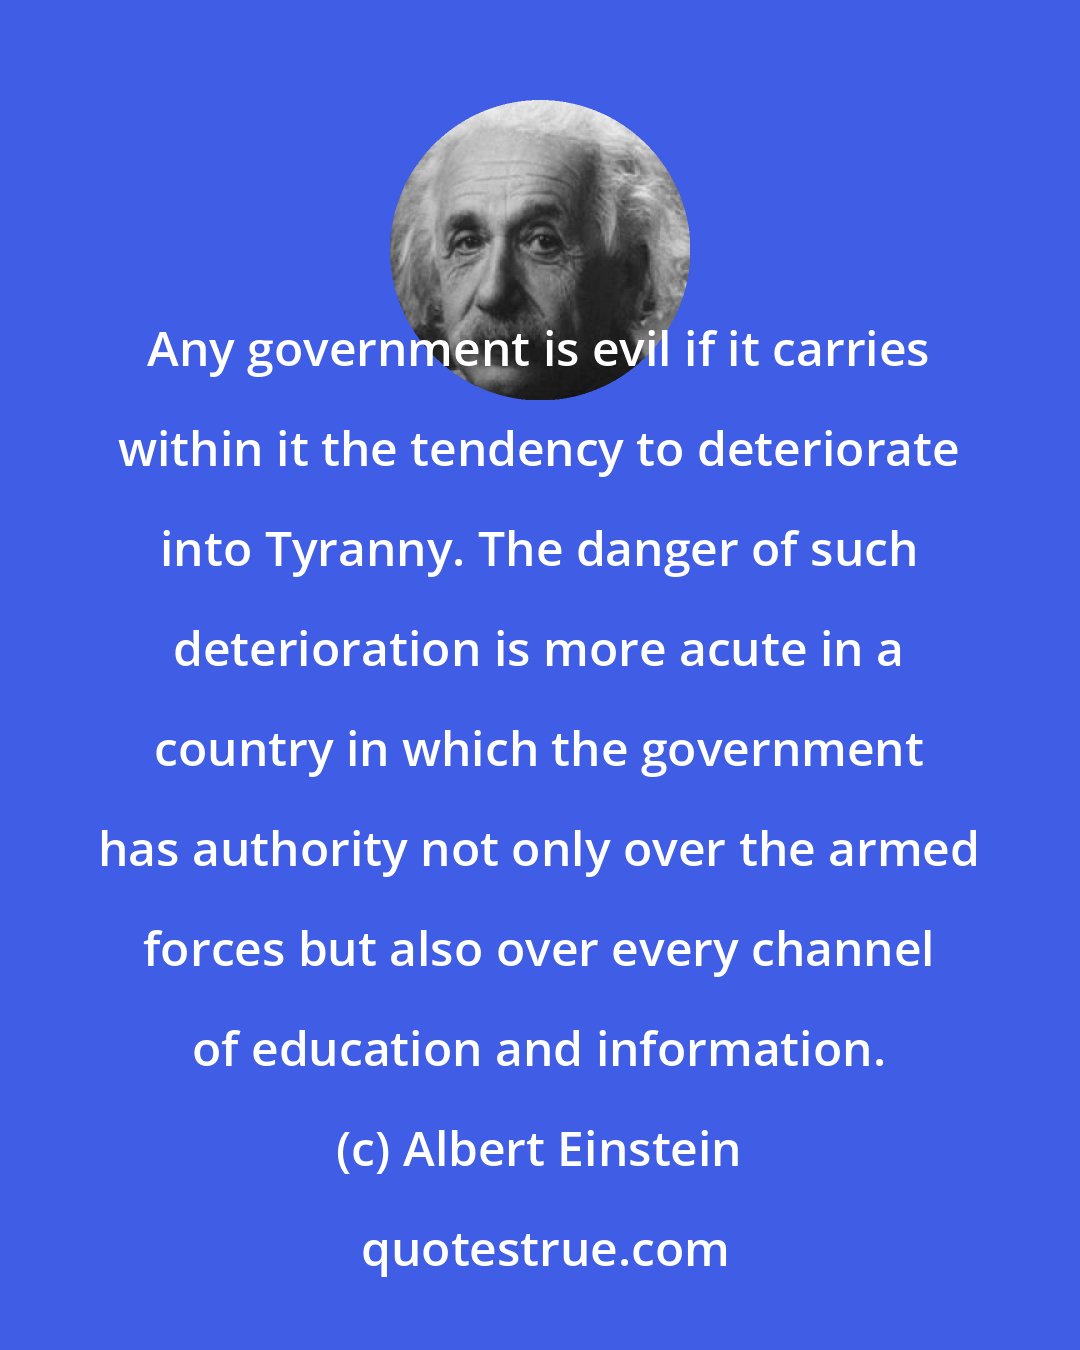 Albert Einstein: Any government is evil if it carries within it the tendency to deteriorate into Tyranny. The danger of such deterioration is more acute in a country in which the government has authority not only over the armed forces but also over every channel of education and information.